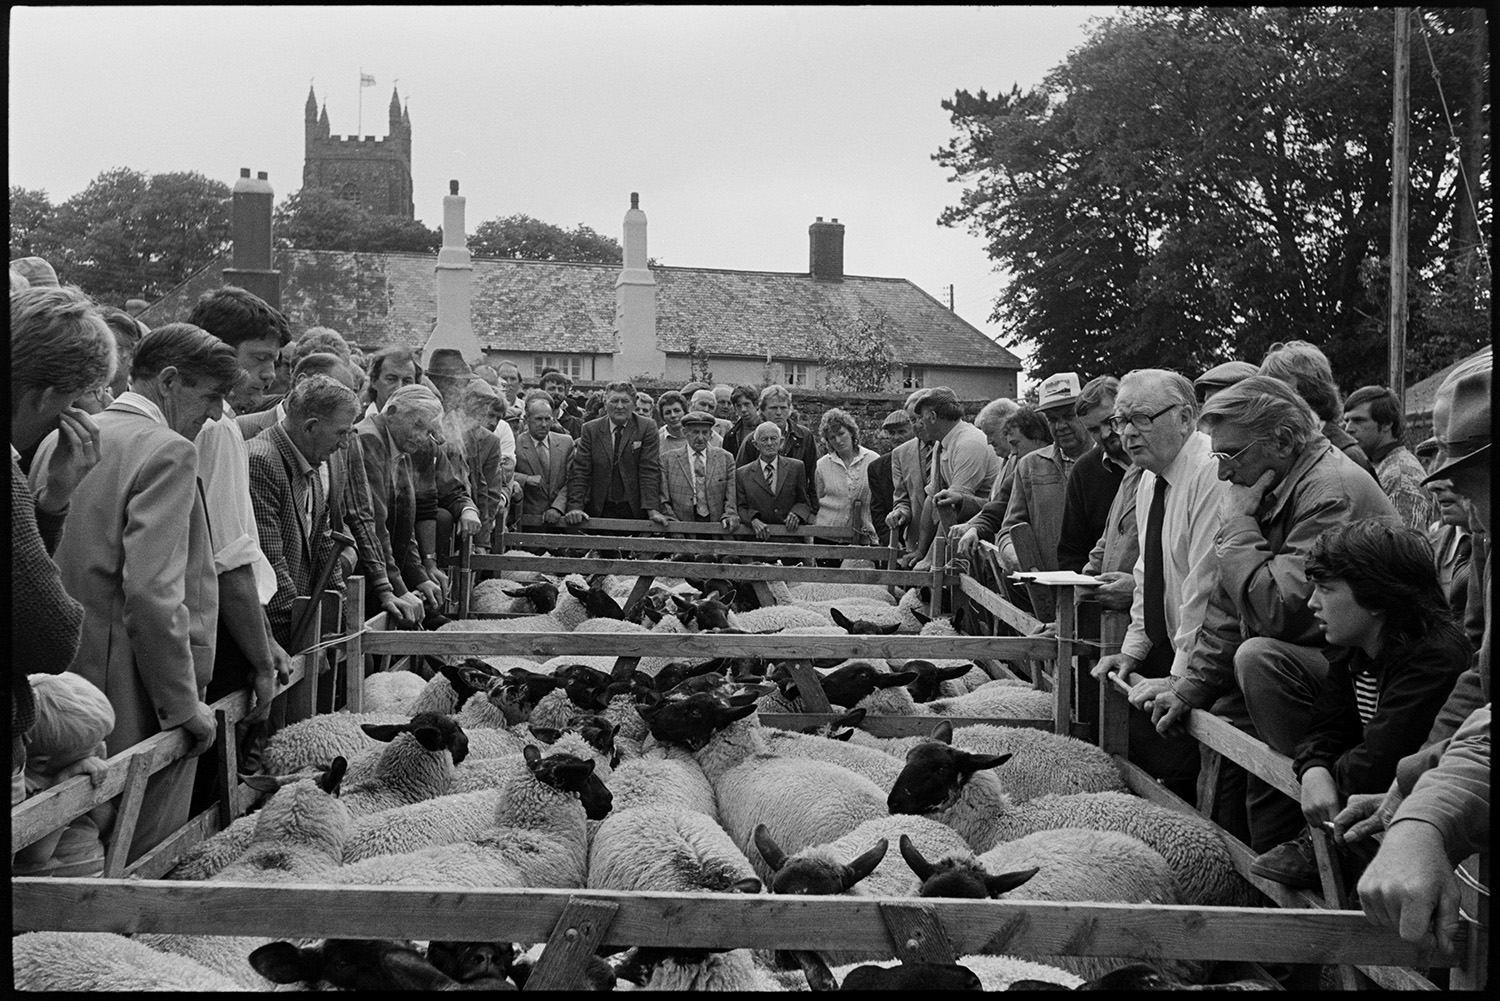 Sheep sale at fair, onlookers and vicar chatting to crowd.
[Men and women gathered around pens of sheep for the sheep sale at Chulmleigh Fair. Chulmleigh Church tower is visible in the background.]